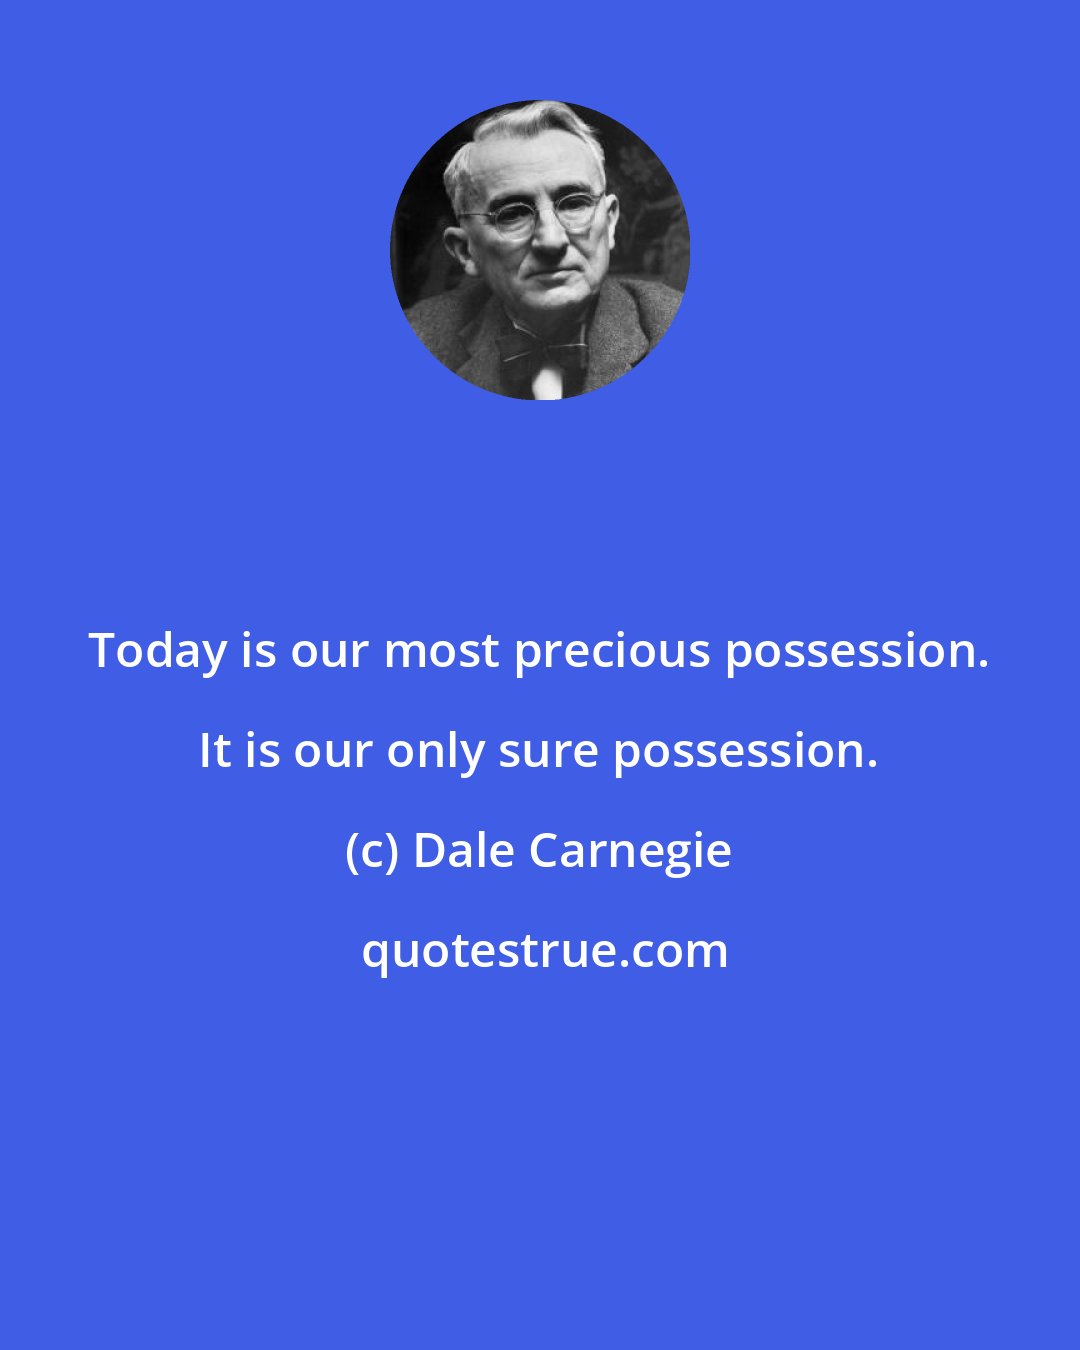 Dale Carnegie: Today is our most precious possession. It is our only sure possession.